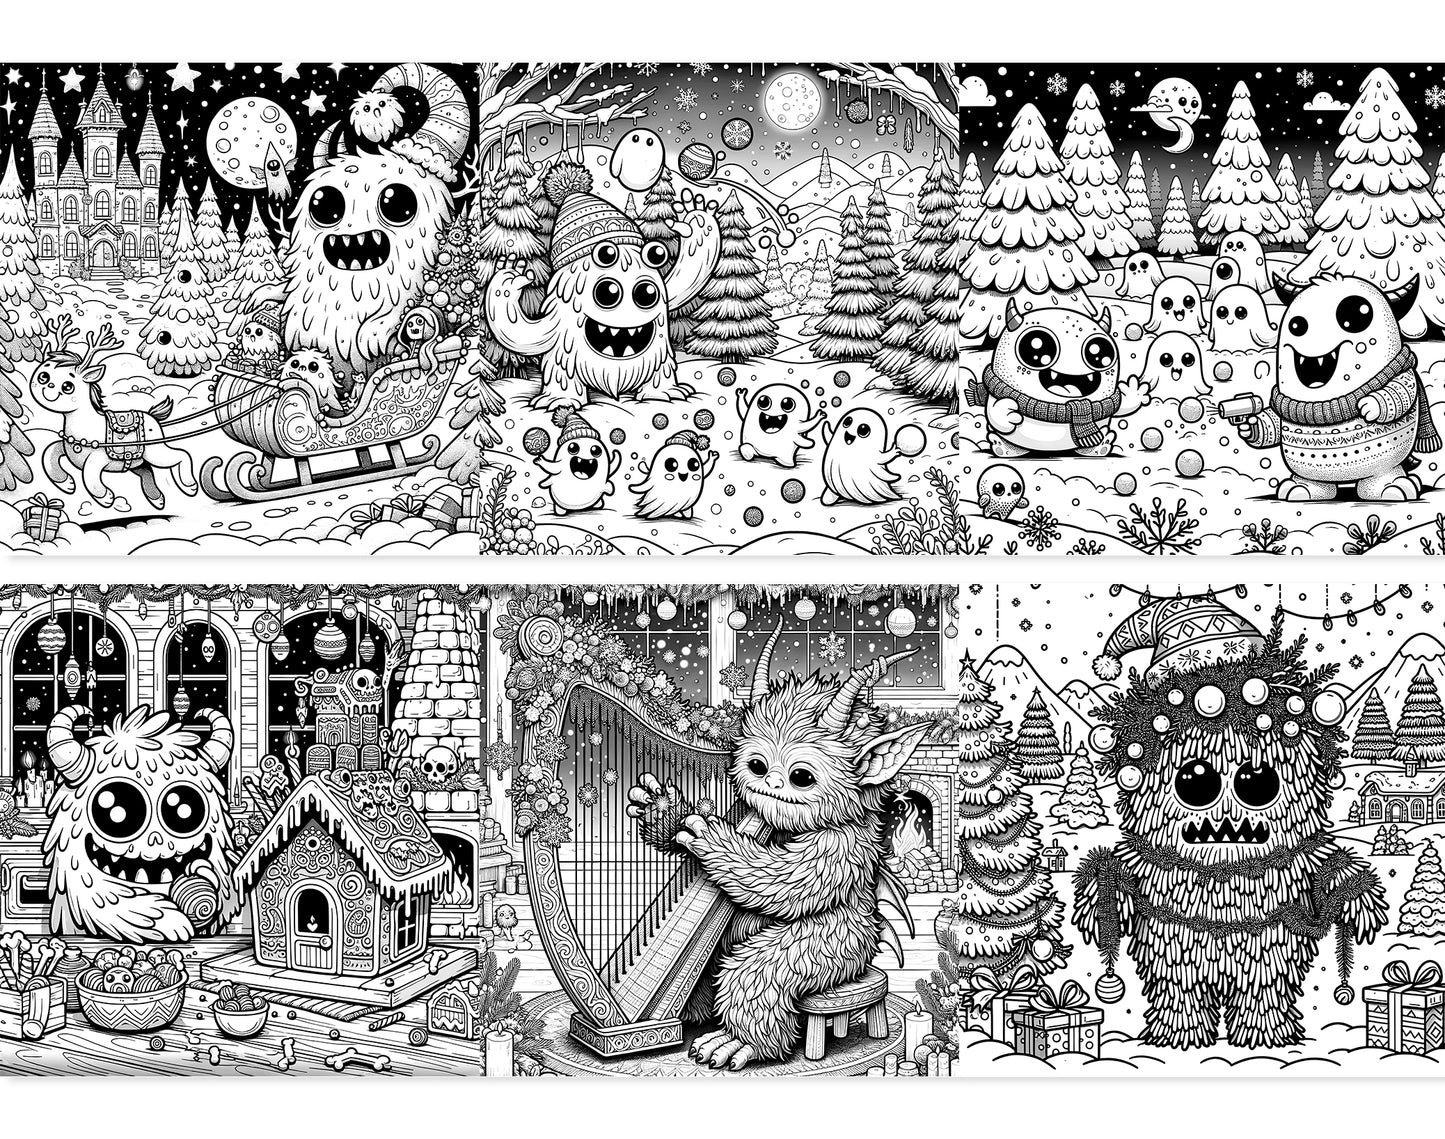 55 Adorable Creepy Christmas Monsters Coloring Pages - Instant Download - Printable